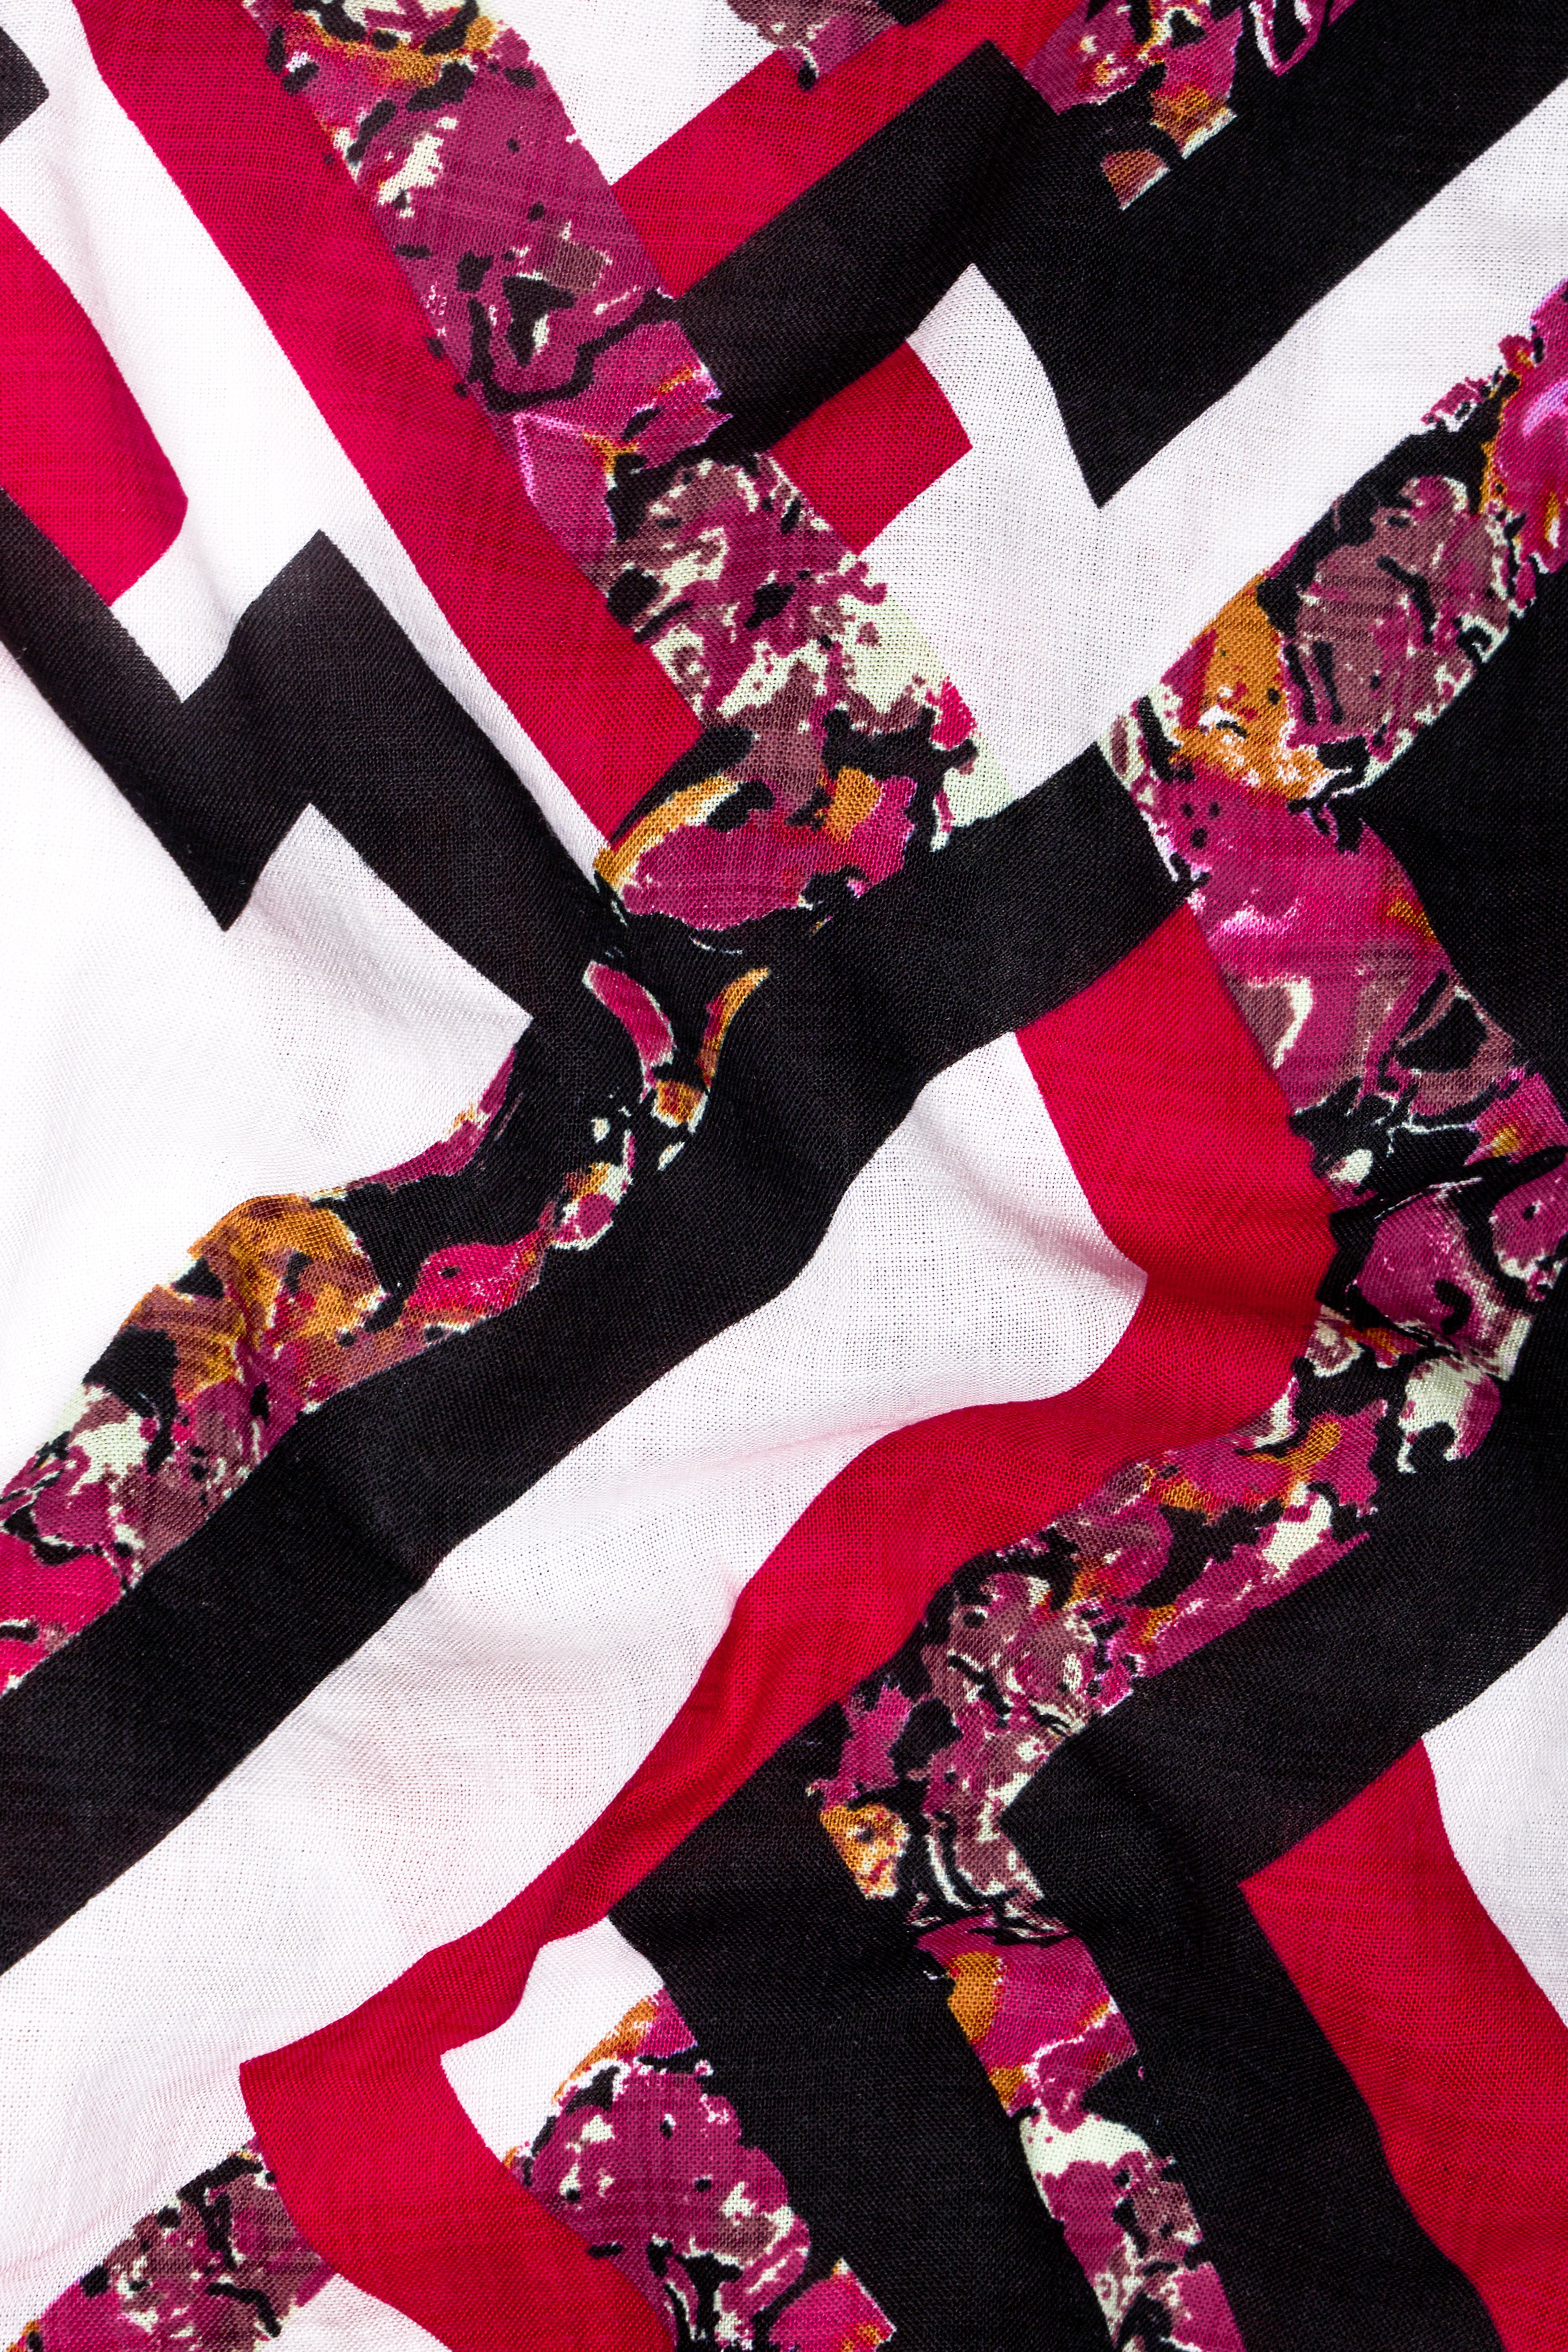 Cadmium Red with White and Black Funky Printed Lightweight Oversized Premium Cotton Shirt